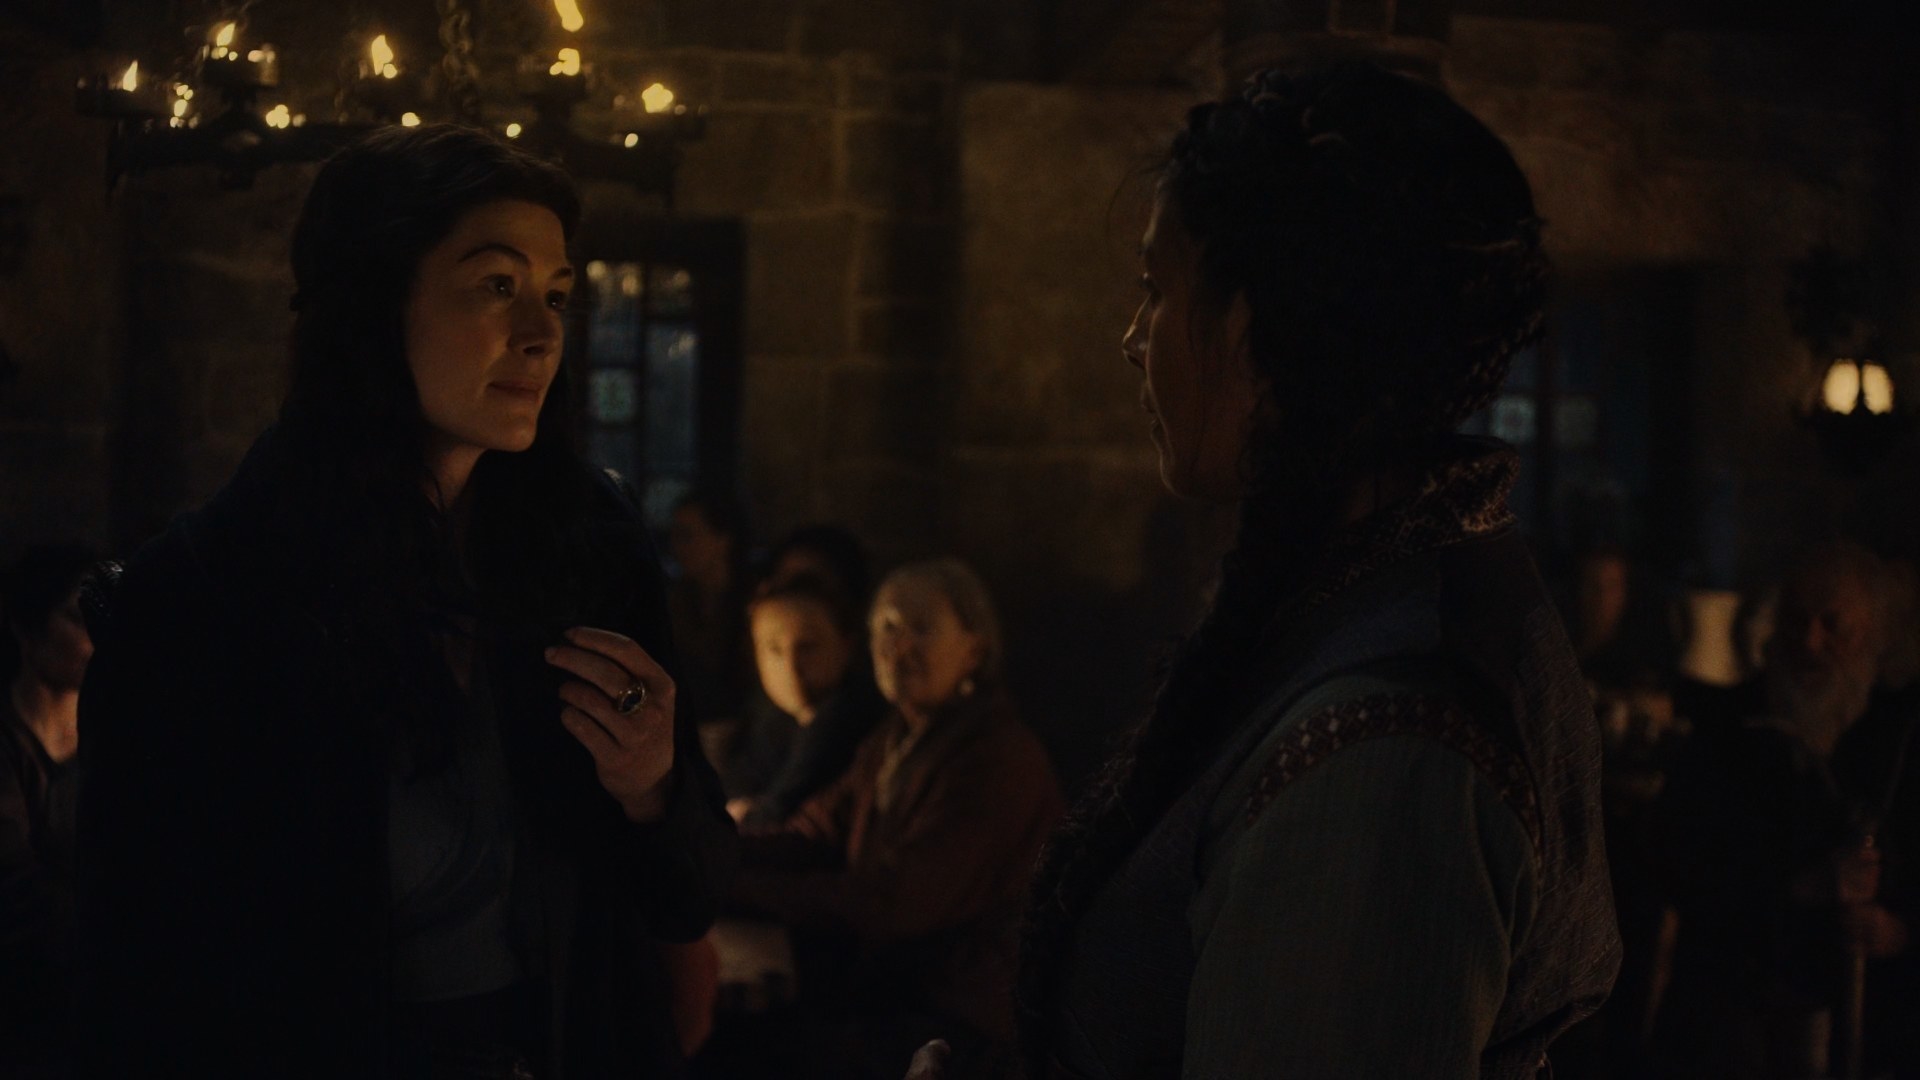 A medium-shot showing Moiraine and Marin al’Vere (Lolita Chakrabarti) in the crowded Winespring Inn. Moiraine’s Aes Sedai ring is on full display as she twists her hair around her fingers